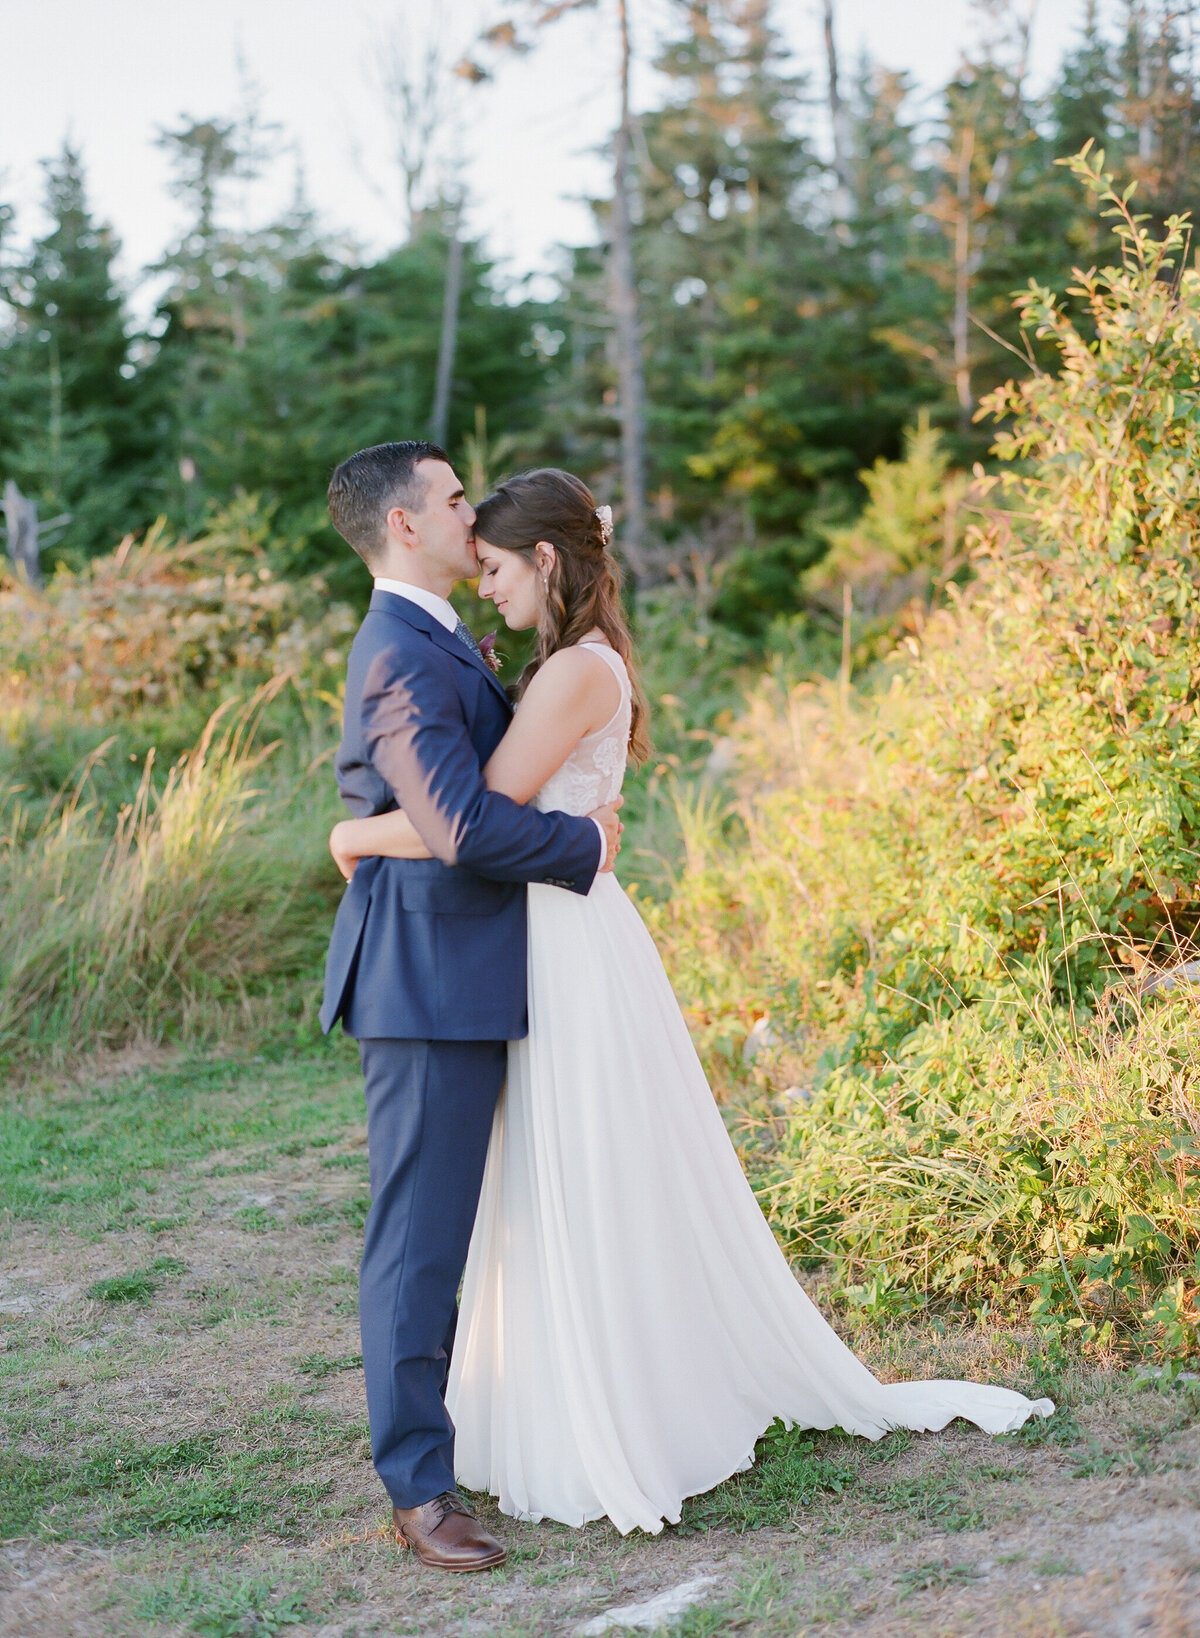 Jacqueline Anne Photography - Halifax Wedding Photographer - Jaclyn and Morgan-72